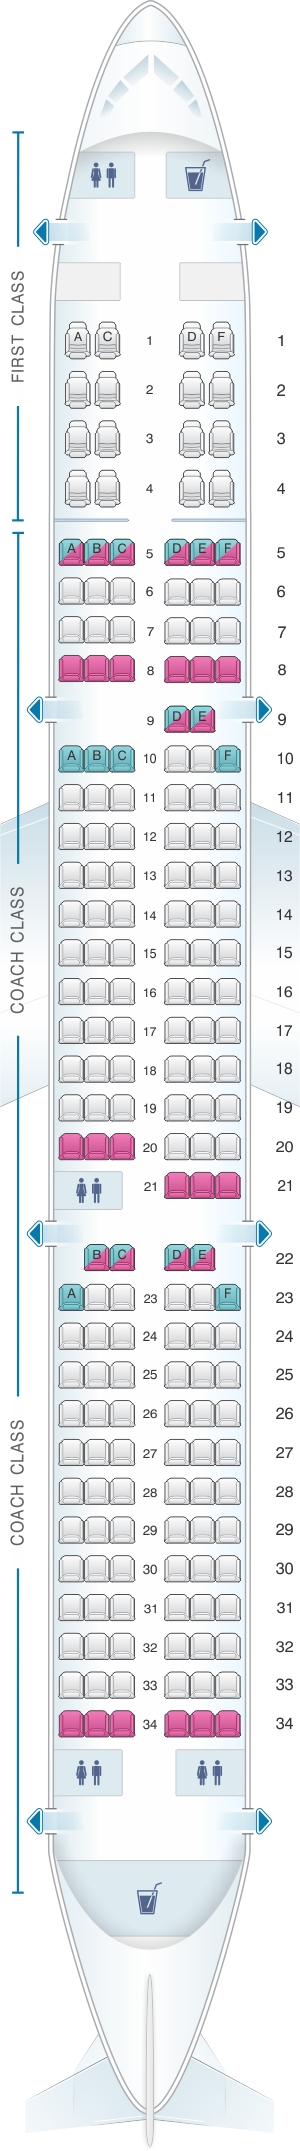 7 Photos American Airlines A321 First Class Seating Chart And ...